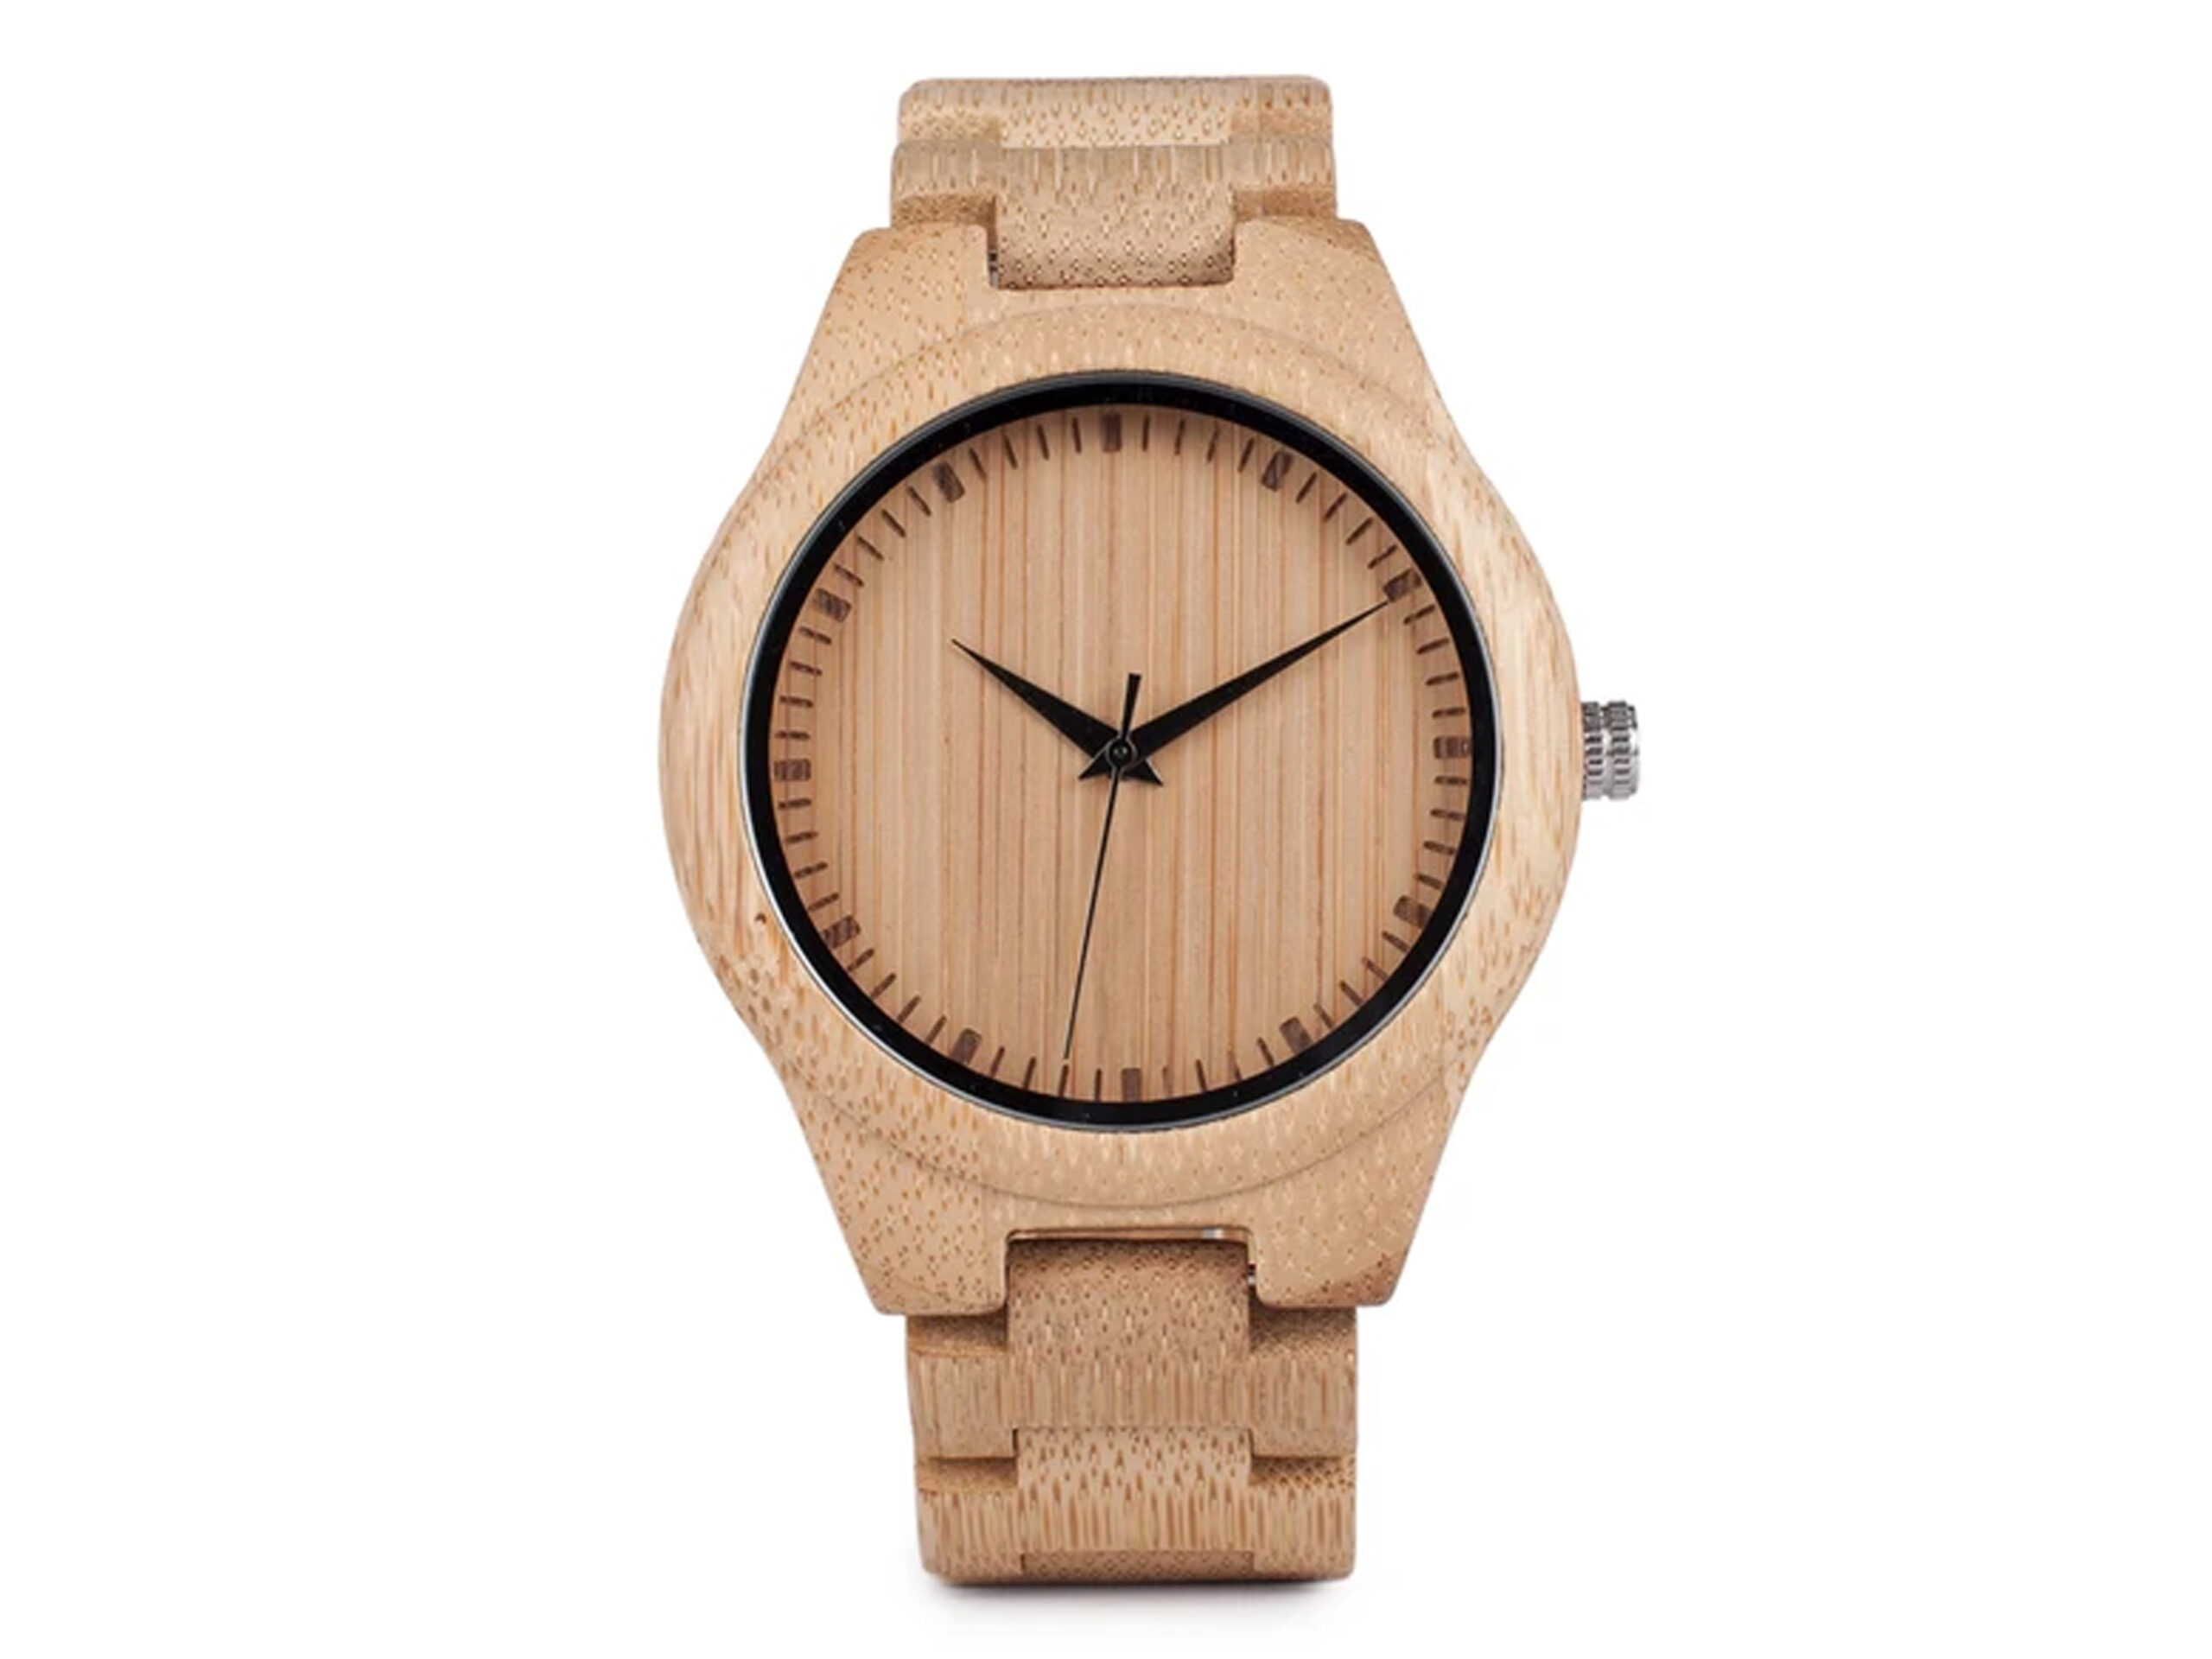 Personalized men's bamboo wood watch